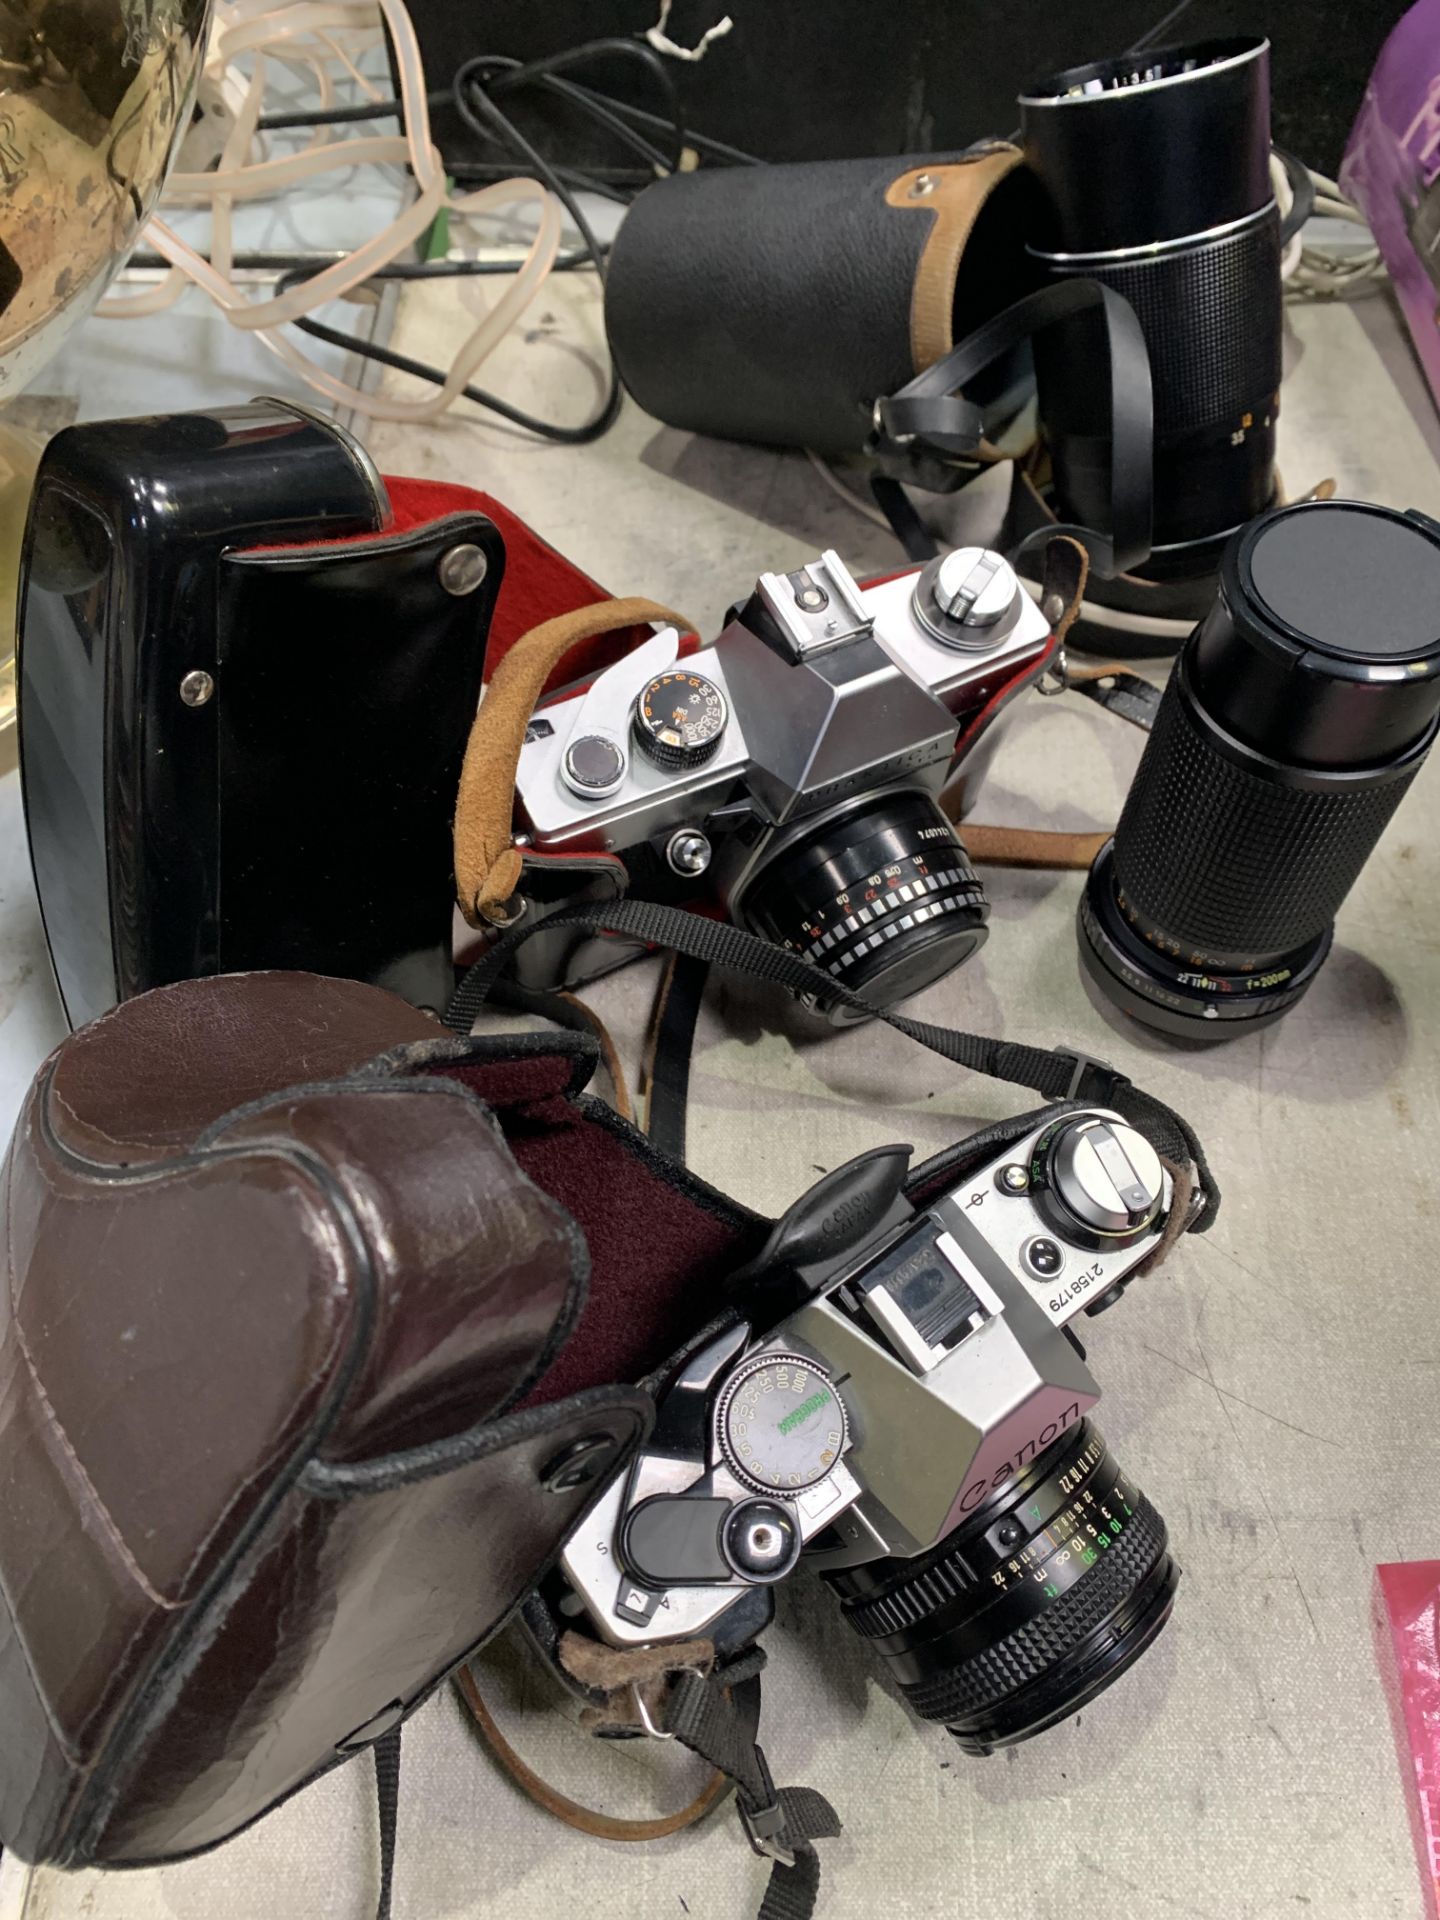 A collection of four cameras and accessories